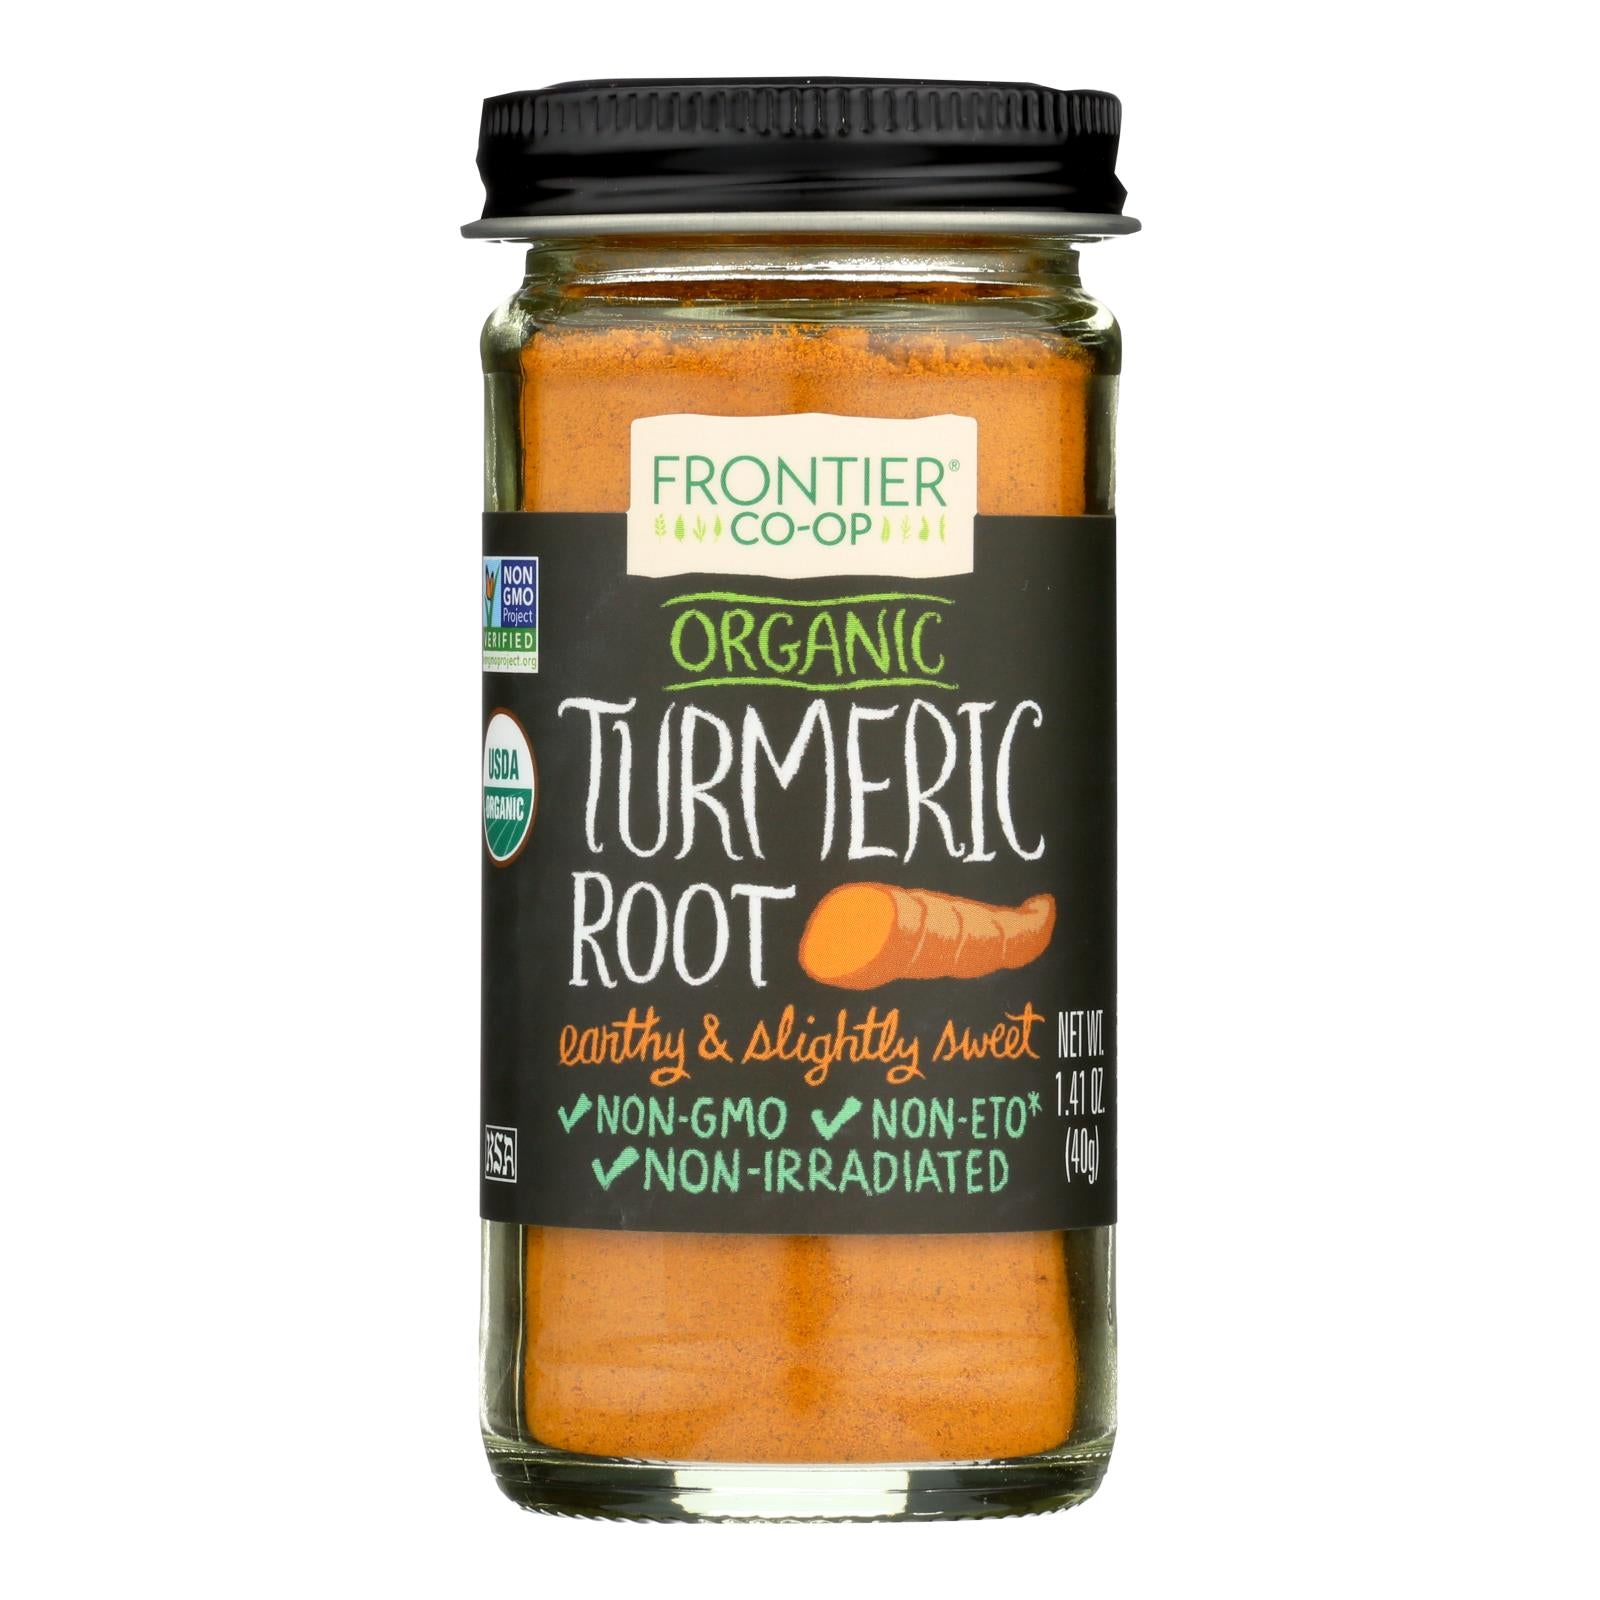 Frontier Herb Turmeric Root - Organic - Ground - 1.41 Oz - Whole Green Foods